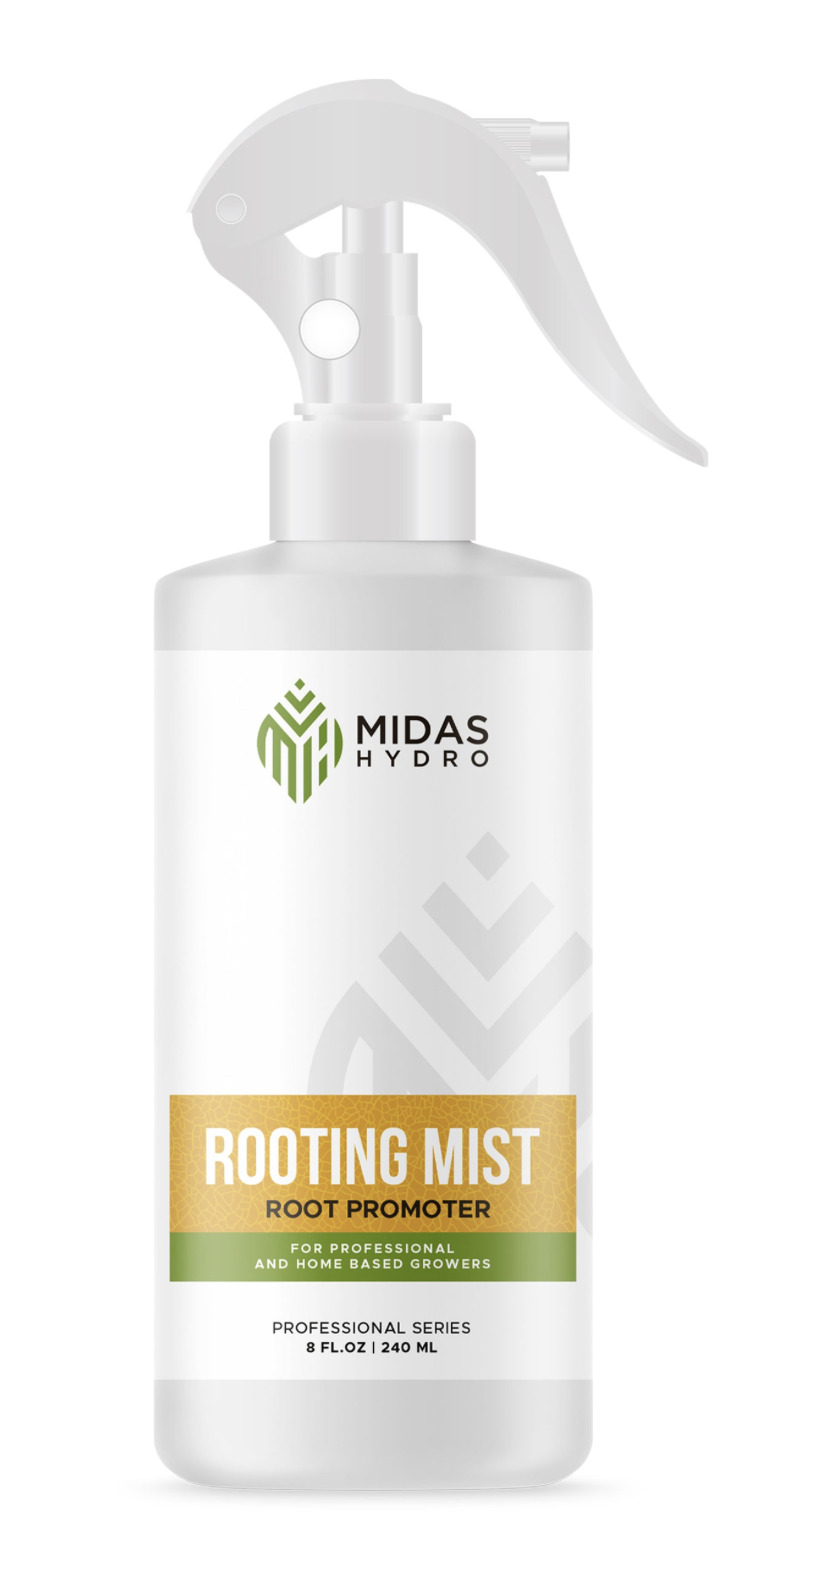 Midas Hydroponic Stimulate Rooting Promoter Mist Spray Growth for Plant Cloning